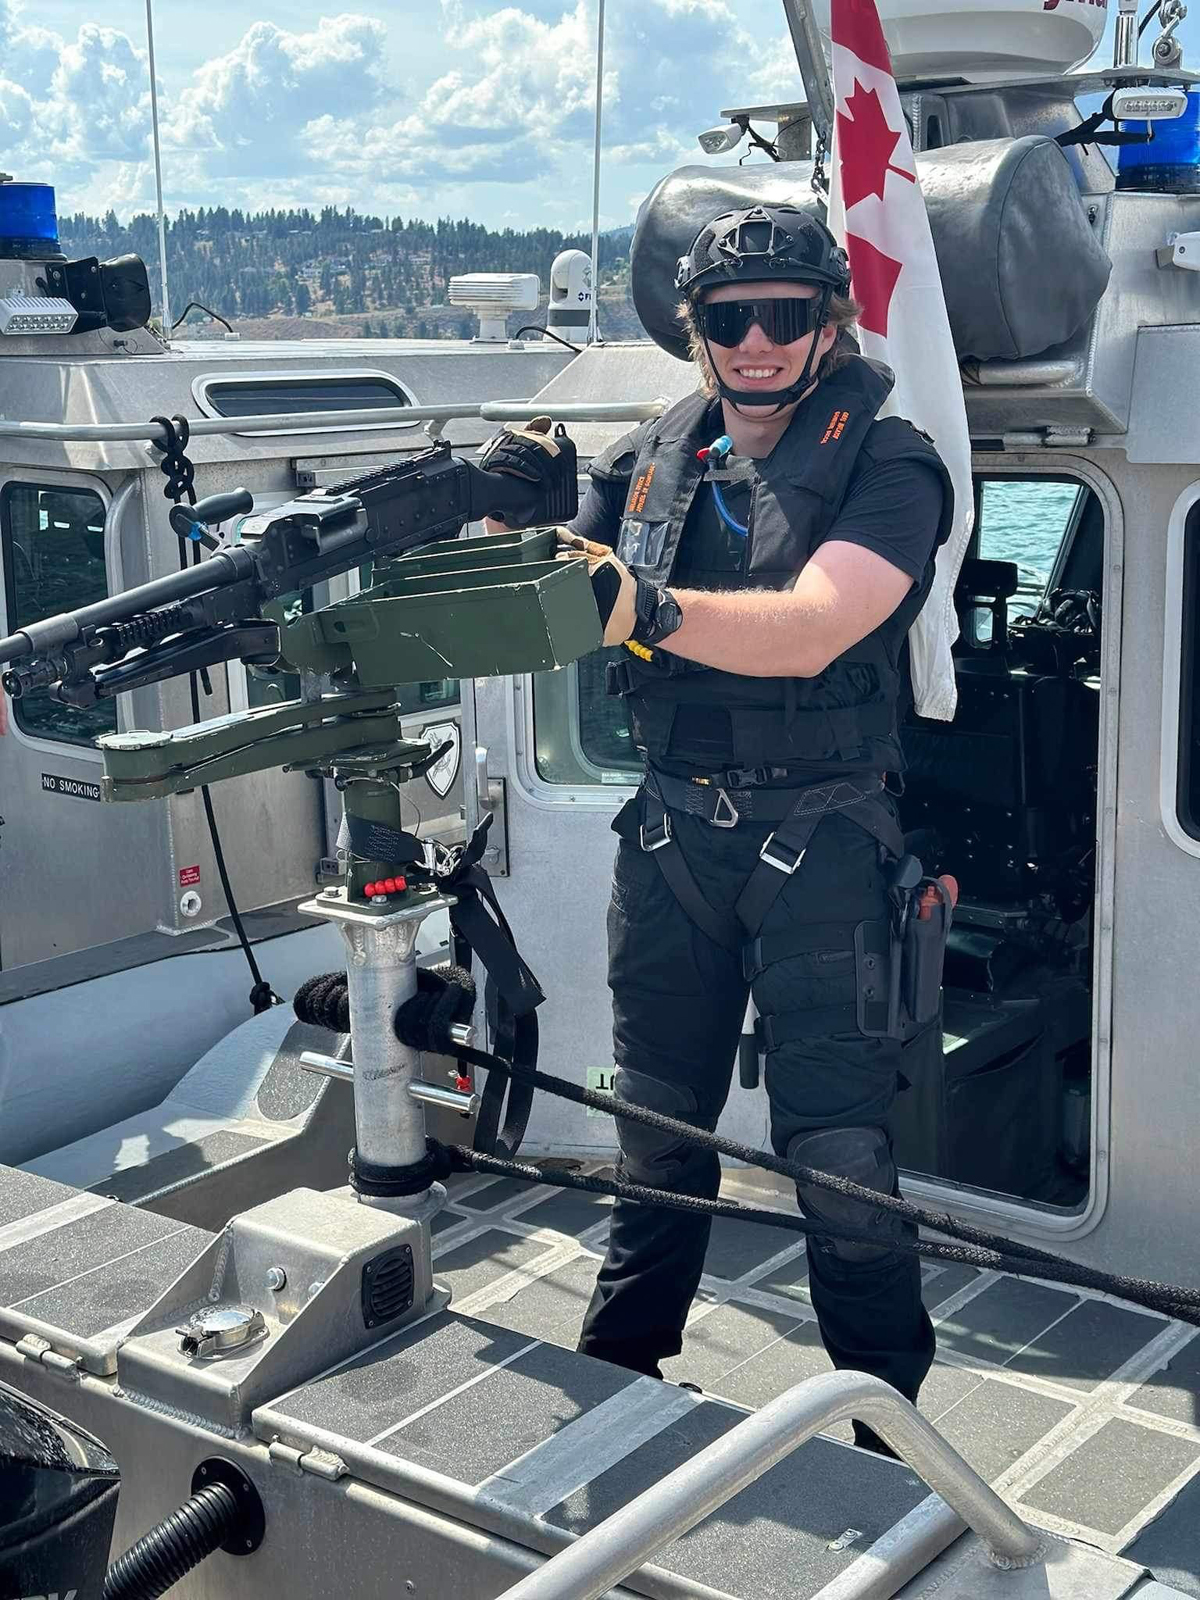 Acting Sub-Lieutenant Jack Rigler joined the Response Boat Tactical Operator Course with the Naval Security Team at CFB Esquimalt from HMCS Cabot in St. John's, Nfld.  Photo: Lieutenant (Navy) Robert Newton, NST Commanding Officer